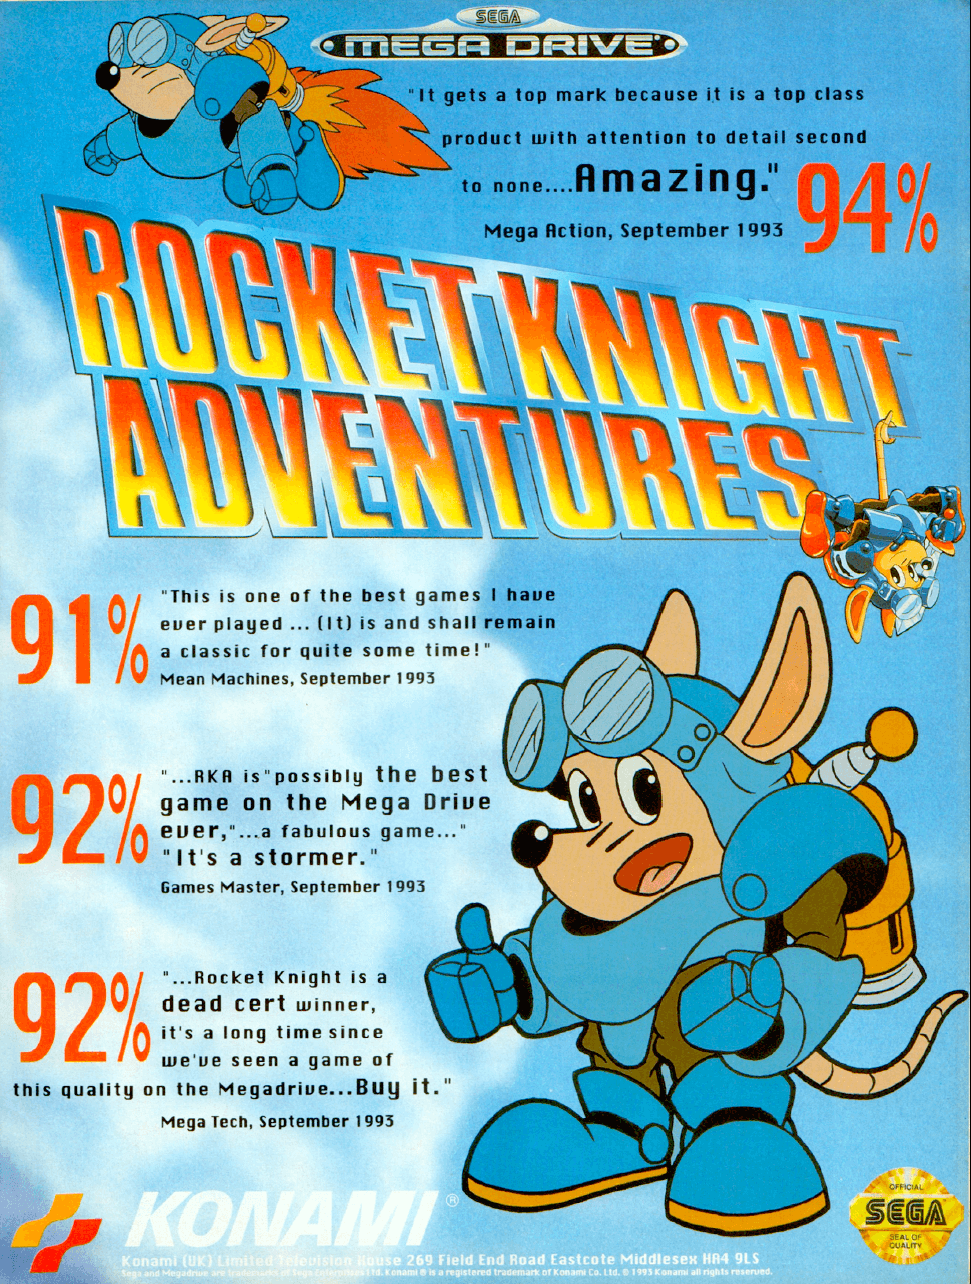 Image For Post | [Description]
Rocket Knight Adventures is the first side-scrolling action game starring Sparkster. He lives in the kingdom of Zebulos, and is the bravest of all the Rocket Knights. One day, an army of pigs comes down to invade the kingdom and capture the princess. It is up to Sparkster to set things right again.

Most of the gameplay in Rocket Knight Adventures involves using Sparkster's rocket pack and sword. Sparkster has to fight off many bosses and survive many precarious situations. The levels are interspersed with a variety of elements, like shooting stages, and giant robot combat.

[Trivia]

Ports, sequels and spin-offs

A SNES version of Rocket Knight Adventures was planned, but was never released.

Two follow-up titles Sparkster: Rocket Knight Adventures 2 on the Mega Drive, and a Sparkster on the SNES were released. Despite both games were produced simultaneously and sharing the same name and box art, they were different games, sharing only their character design and music score, with the Mega Drive release acting as a direct sequel and the SNES game being a spin-off. The two titles are often confused for being the same game due to the "Rocket Knight Adventures 2” subtitle only being employed in Japan.

In October 2009, Konami announced they would release another sequel, titled Rocket Knight (which is the sequel to the Sega Megadrive/Genesis game called Sparkster: Rocket Knight Adventures 2, but not really a remake of the Sega Megadrive/Genesis game called Rocket Knight Adventures), made by the British developer, Climax Group. The game was released on Xbox 360, PlayStation 3 and Steam on May 12, 2010. Nobuya Nakazato was not involved with this title in any way,[1] though Nazakato was credited by the developers in the Special Thanks section of the game credits.

[References] 
Sparkster has appeared as a playable character in a few recent titles, such as New International Track &amp; Field for Nintendo DS and Krazy Kart Racing for iPhone and iPod Touch. He also has cameos in Ganbare Goemon 2: Kiteretsu Shōgun Magginesu for the SNES, Snatcher for the Mega-CD, Jikkyō Power Pro Wrestling '96: Max Voltage for the SNES, Mitsumete Knight for the PlayStation, They was disguised by Pastel in TwinBee PARADISE in Donburishima for PC, and a figure resembling him also appears in an alternate ending to Contra: Shattered Soldier for the PlayStation 2, and as nonogram pixel on Pixel Puzzle Collection for the iPhone and Android.

[Comic] 
A Sparkster comic was written by Nigel Kitching in the UK-made Sonic the Comic. It was based on the Mega Drive/Genesis version of Sparkster. In an interview, Kitching said that Sparkster was the easiest game to adapt into a story, due to being similar to the Sonic the Hedgehog games. He was working on a second Sparkster story, but the plan was dropped when Fleetway were unable to obtain permission from Konami to use the character. 

Alternate Titles

    "ロケットナイトアドベンチャーズ" -- Japanese spelling
    "로켓나이트 어드벤쳐스" -- Korean spelling